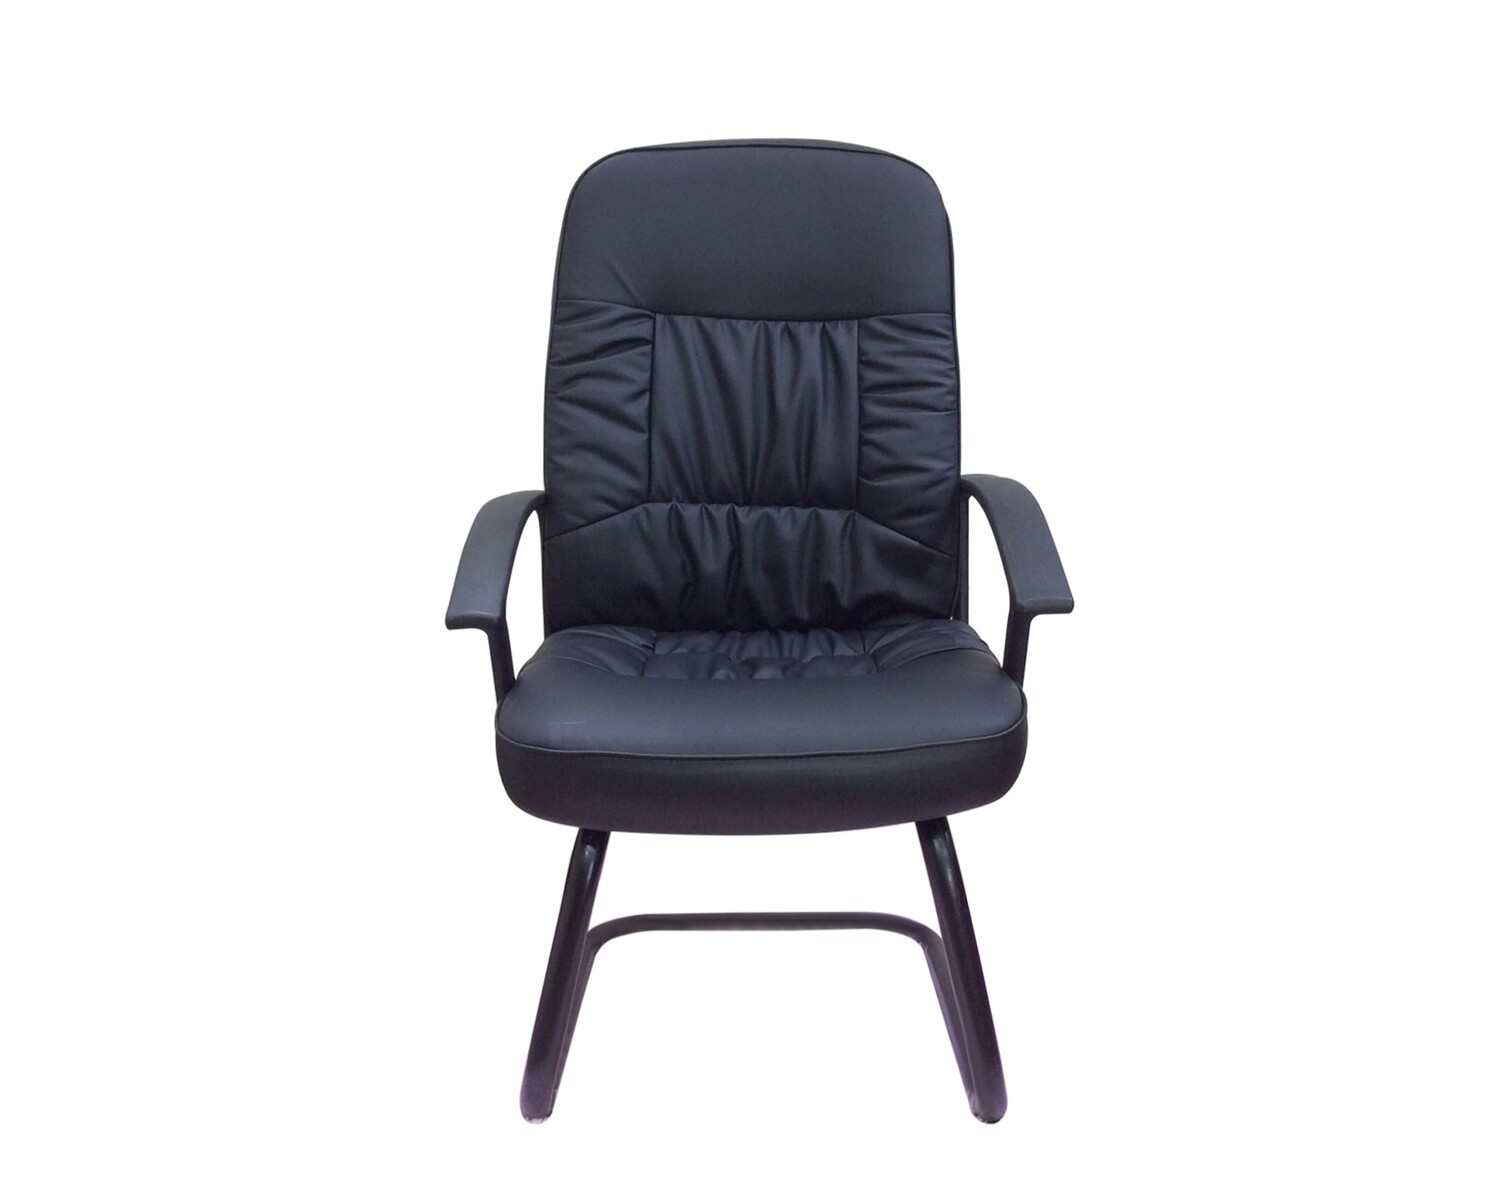 Ofix Deluxe-35W Waiting Chair PU Leather (Black)